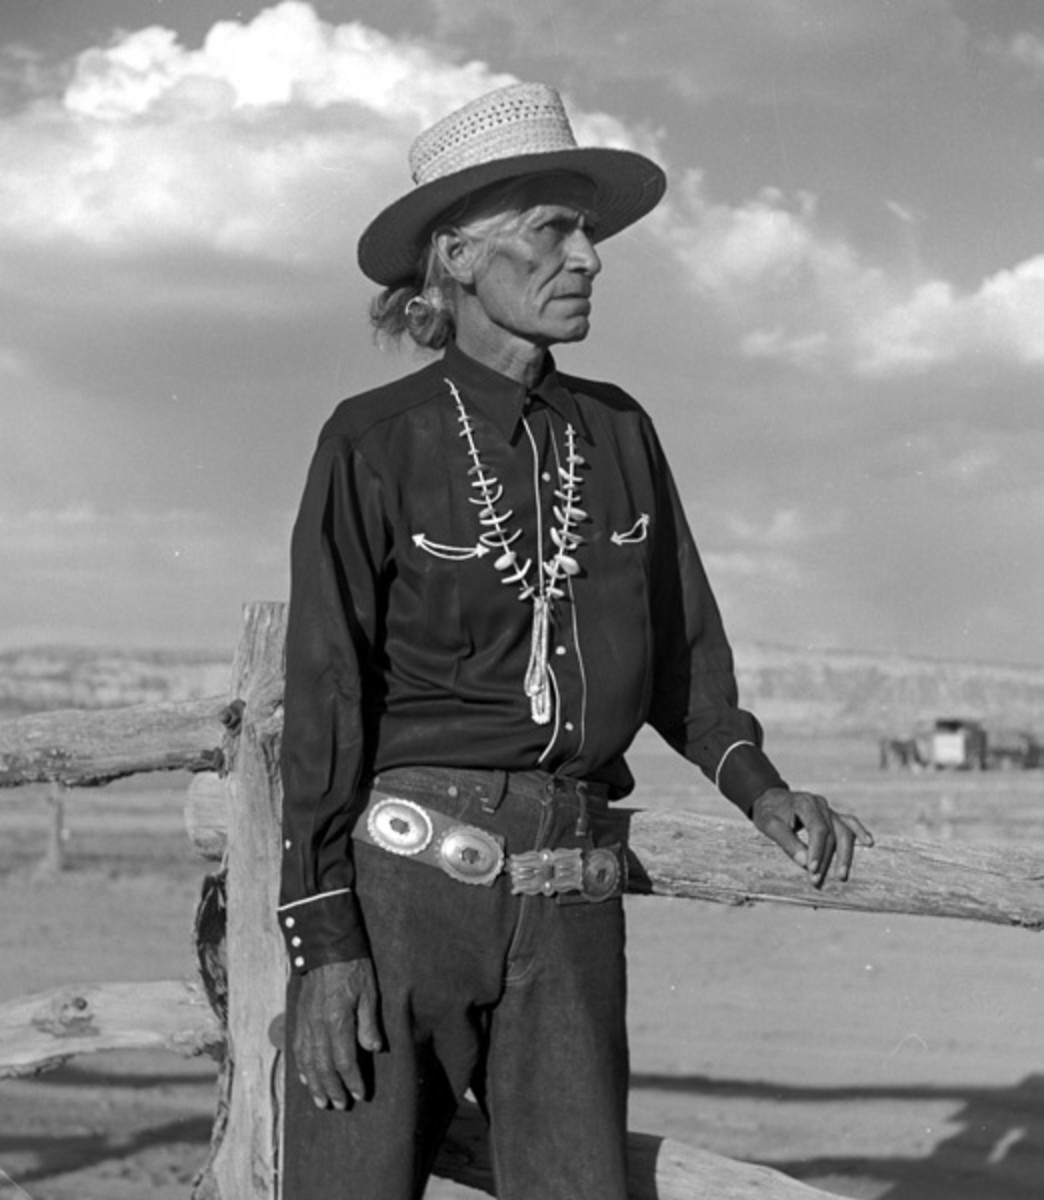 photo by Don Blair of an elderly man in traditional Navajo dress wearing a concho belt turquoise necklace and straw hat